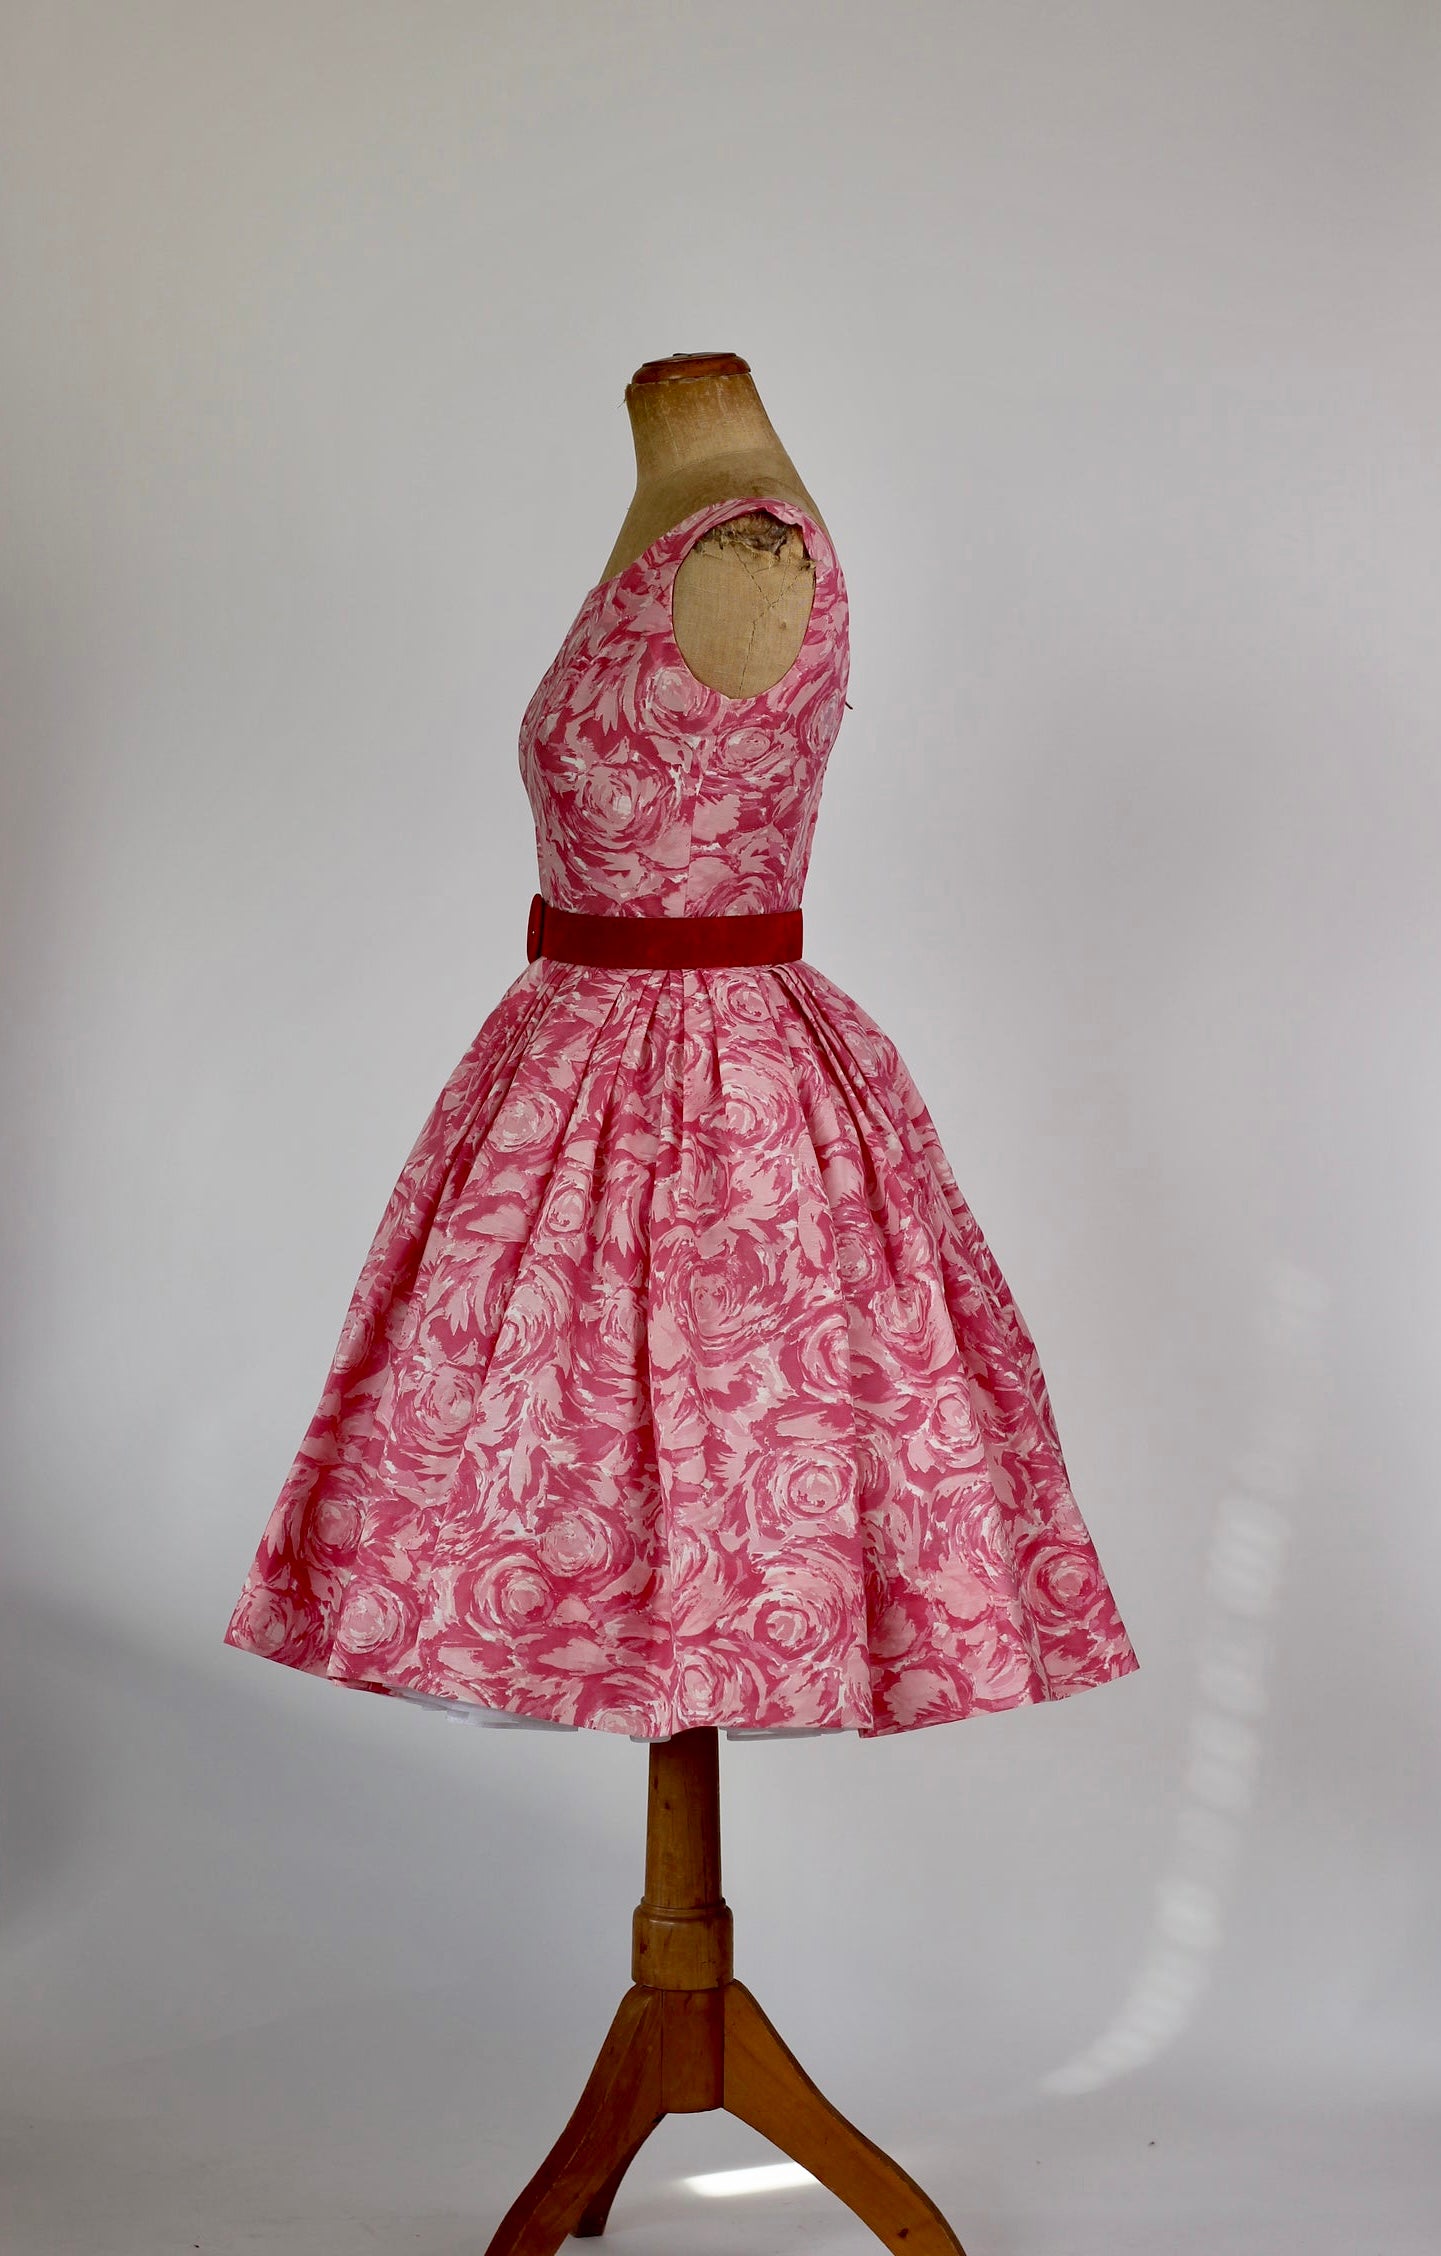 1950s Pink Cotton Dress with Floral Print//Size S